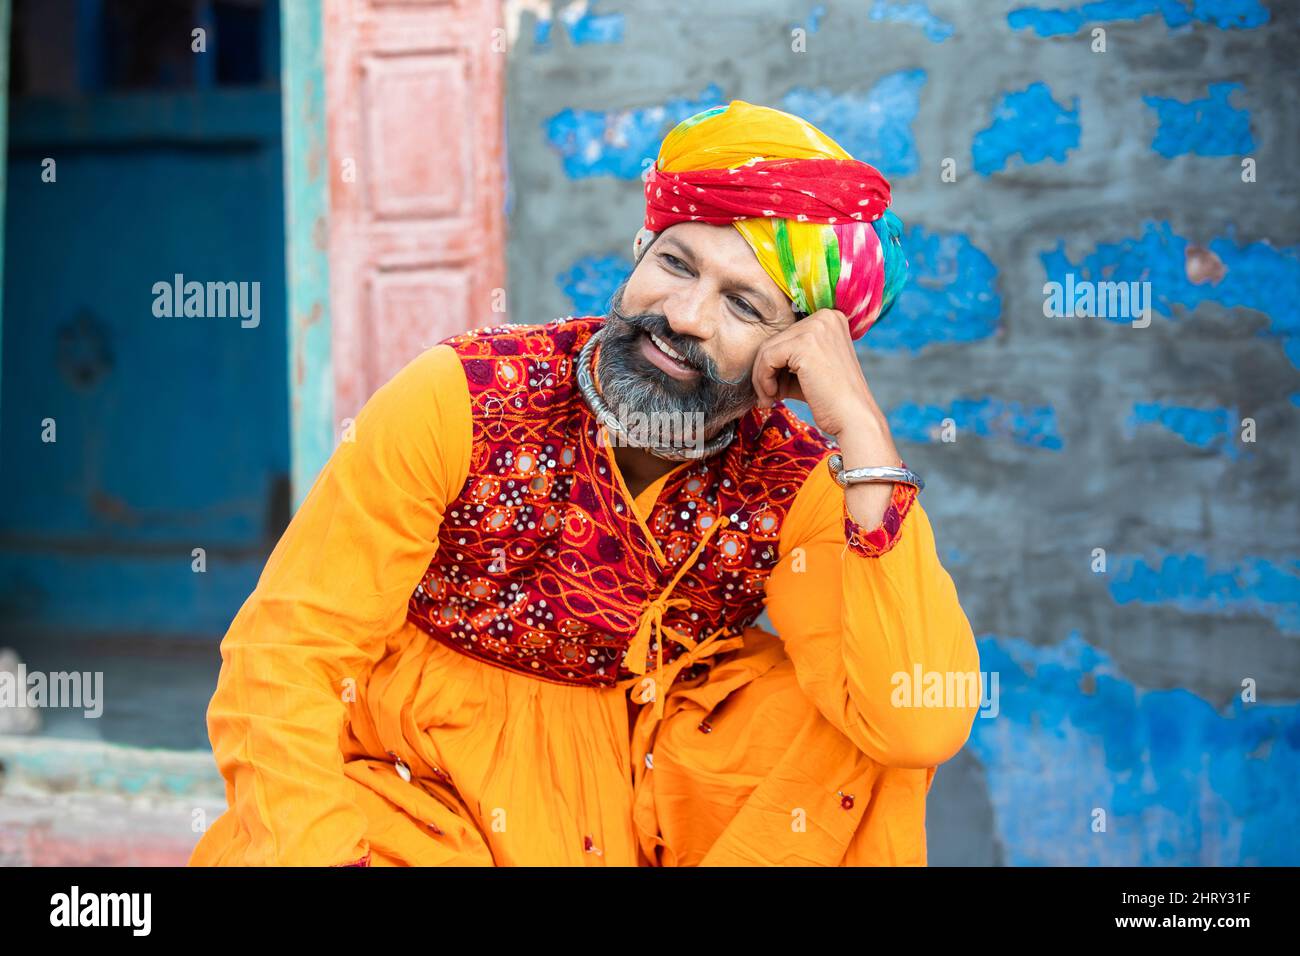 Portrait of happy traditional north indian man wearing colorful attire sitting. Smiling Rajasthan male with turban and ethnic outfits. Culture and fas Stock Photo